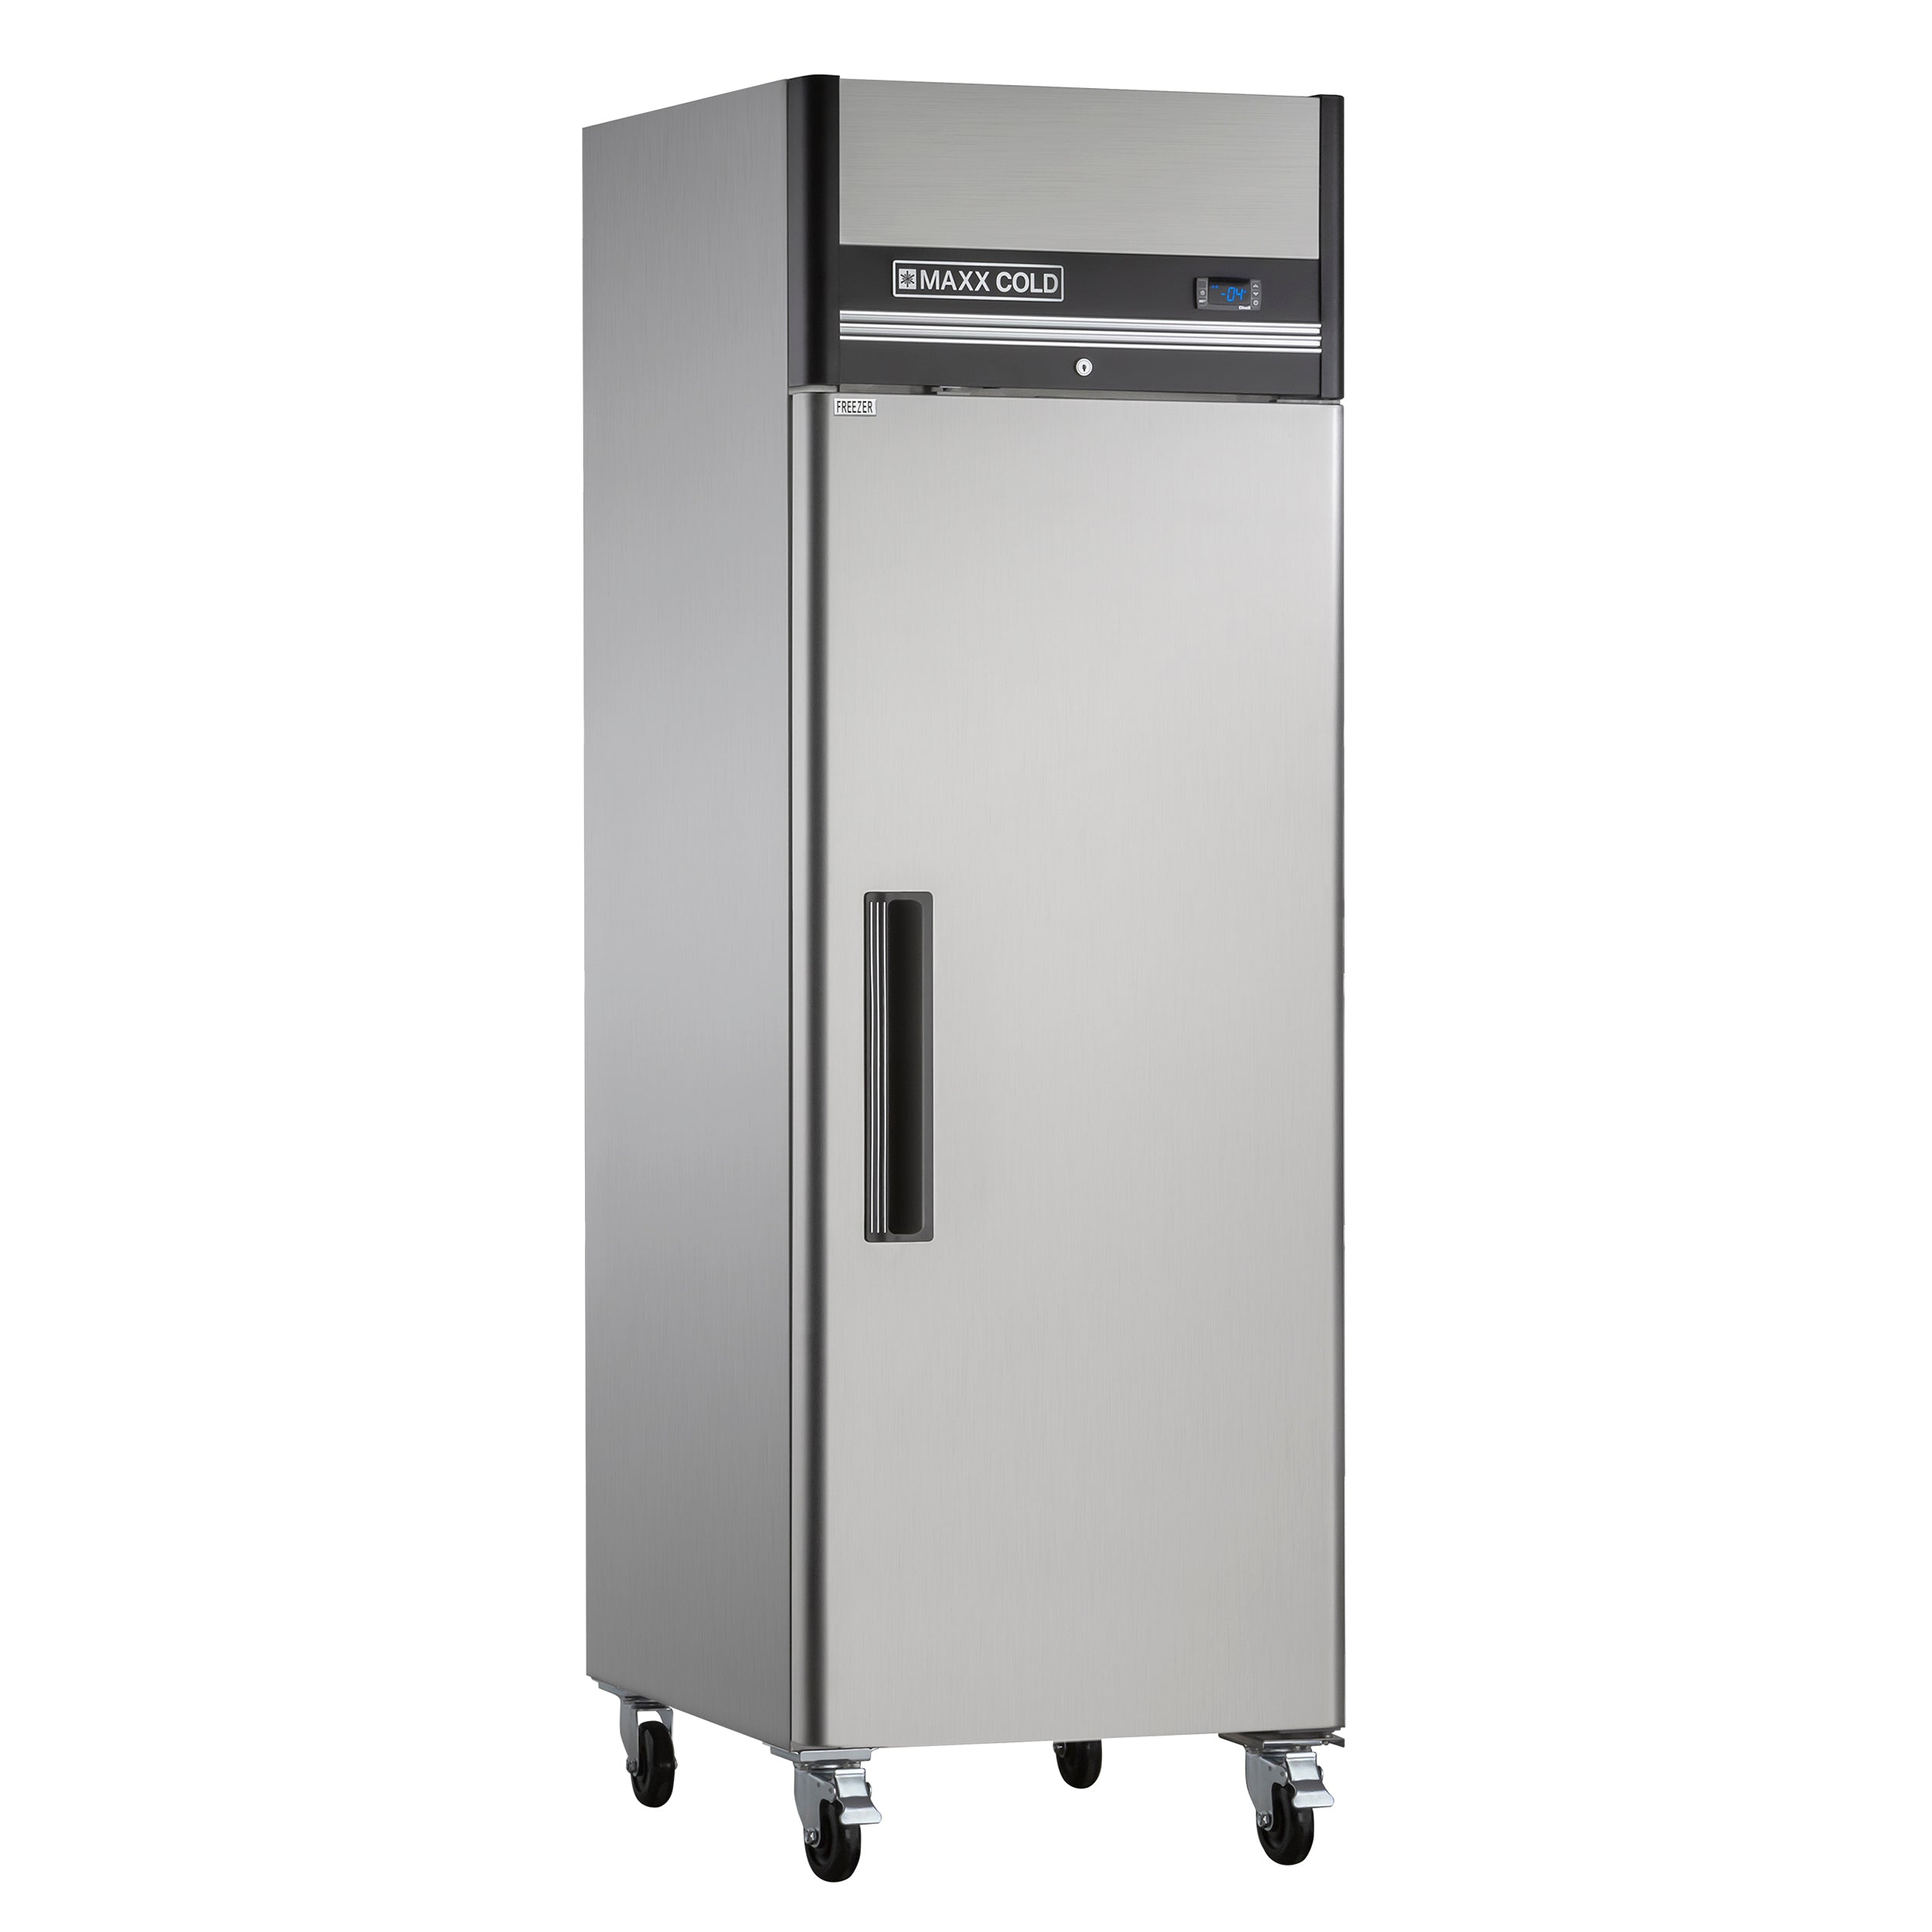 Maxx Cold - MXCF-19FDHC, Maxx Cold Single Door Reach-in Freezer, Top Mount, 25.2"W, 19 cu. ft. Storage Capacity, in Stainless Steel